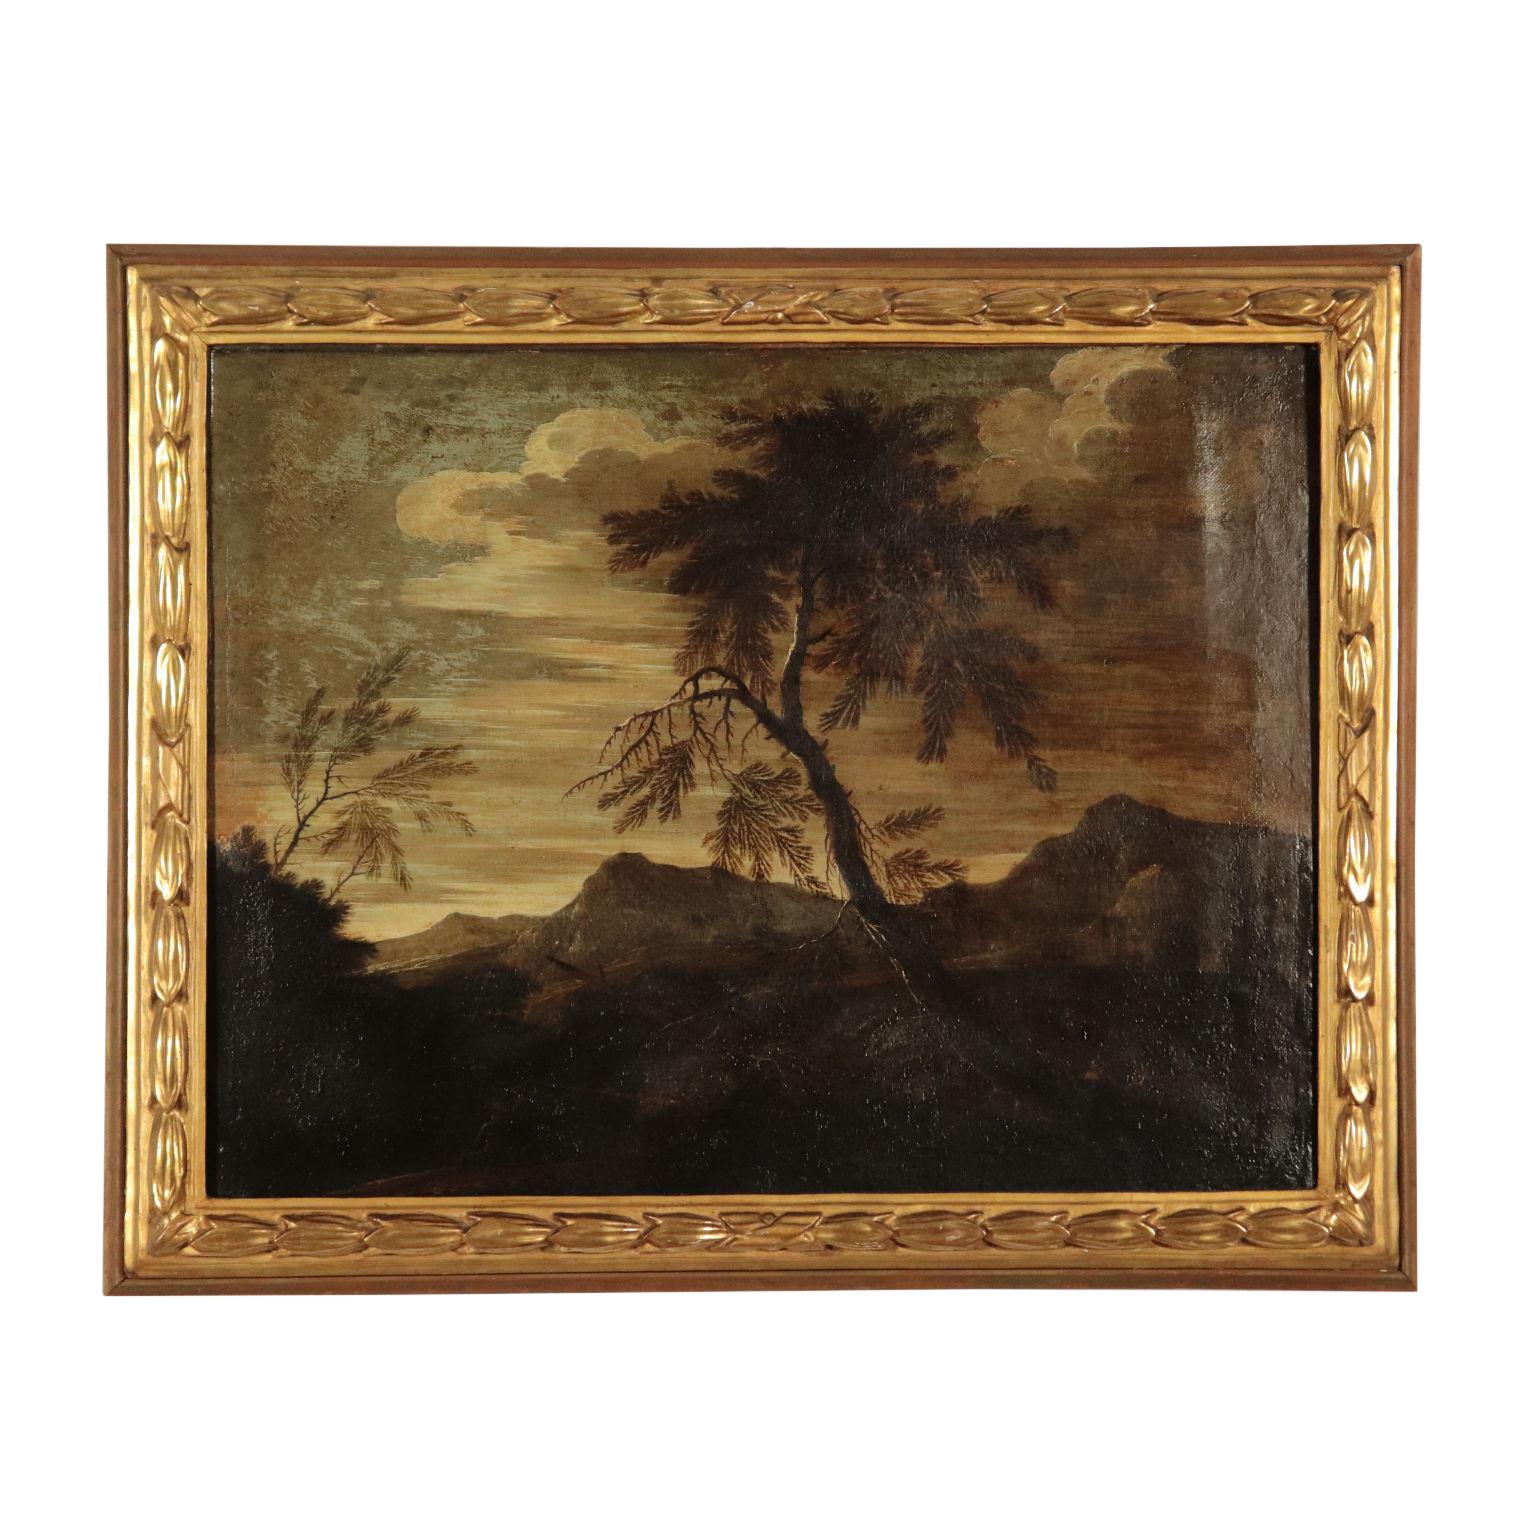 Unknown Landscape Painting - Landscape with Figures, Oil on Canvas, Italian School 17th Century